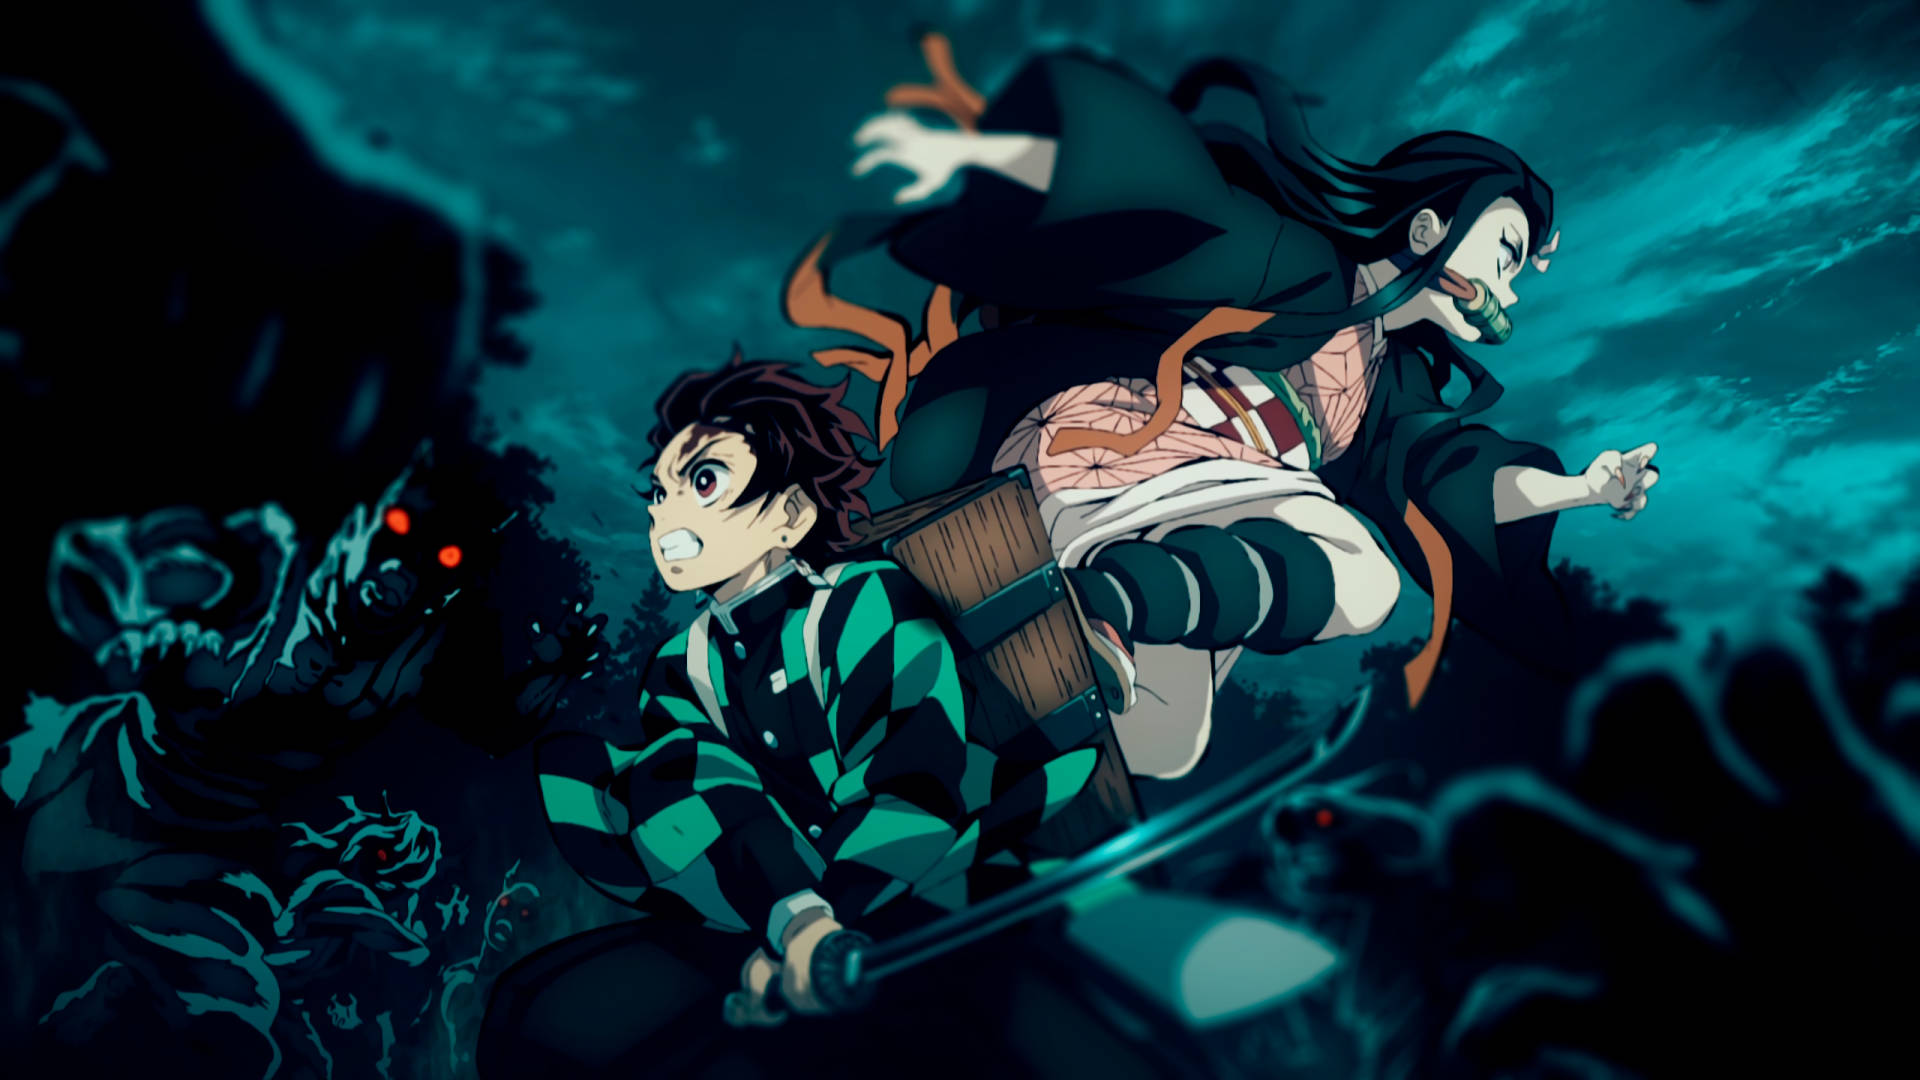 Tanjiro and Nezuko fight side by side against demons. Wallpaper